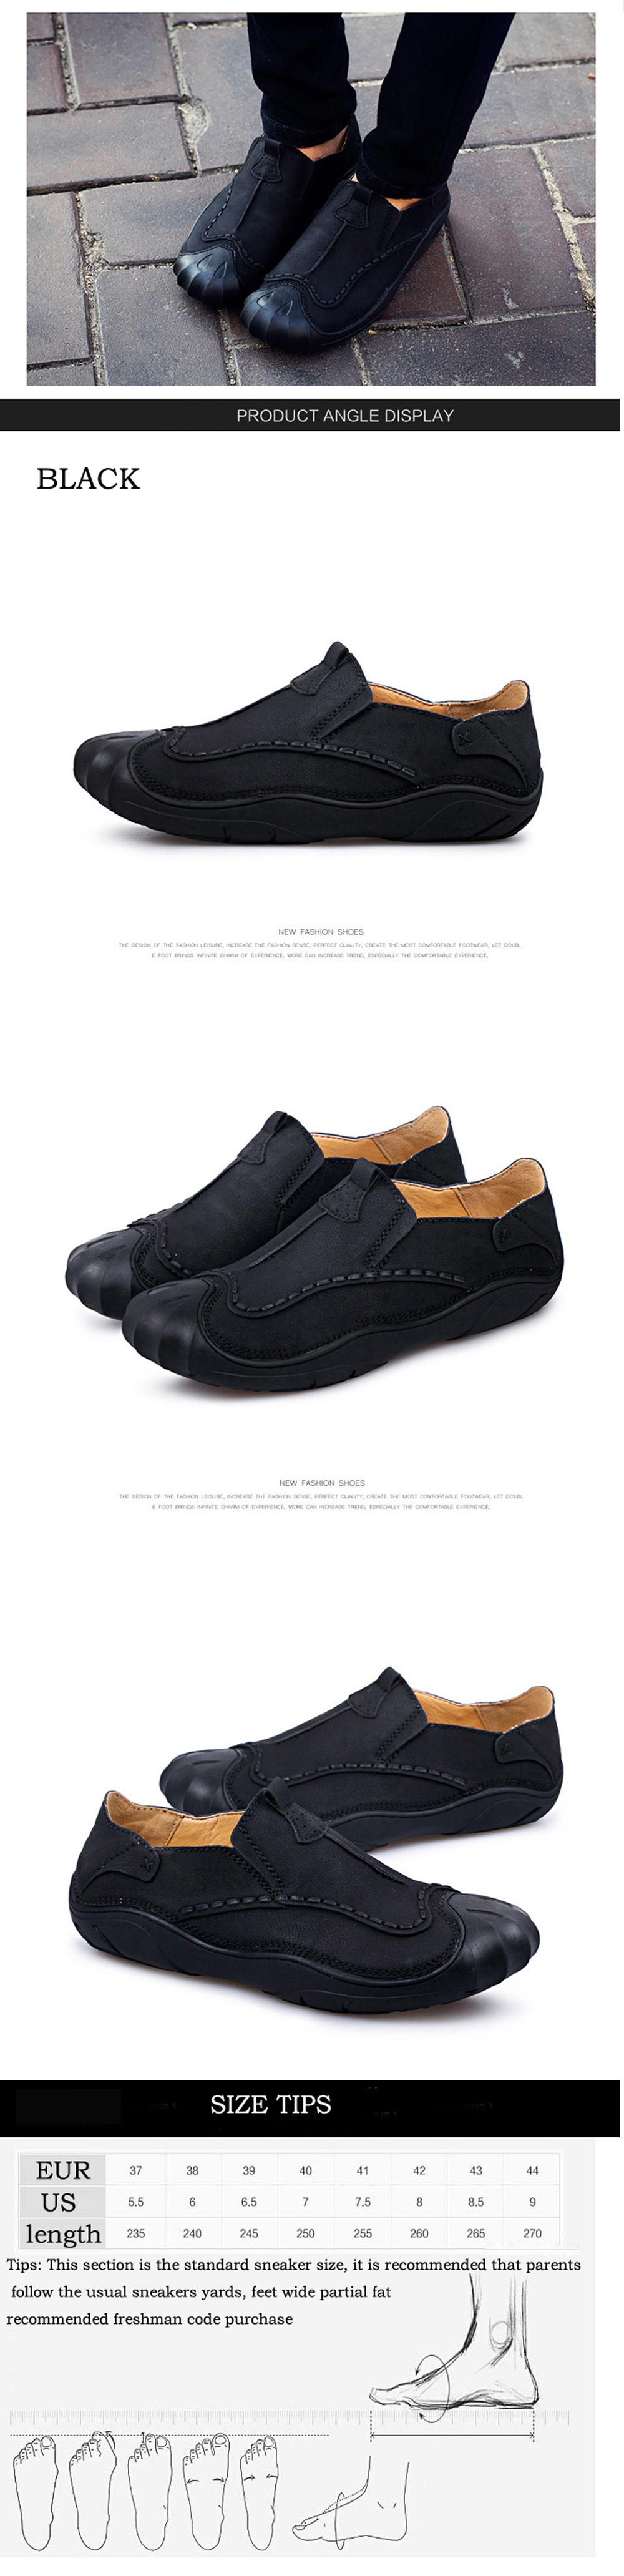 New Fashion Outdoor Shoes Men Comfortable Breathable Trend Casual Shoes